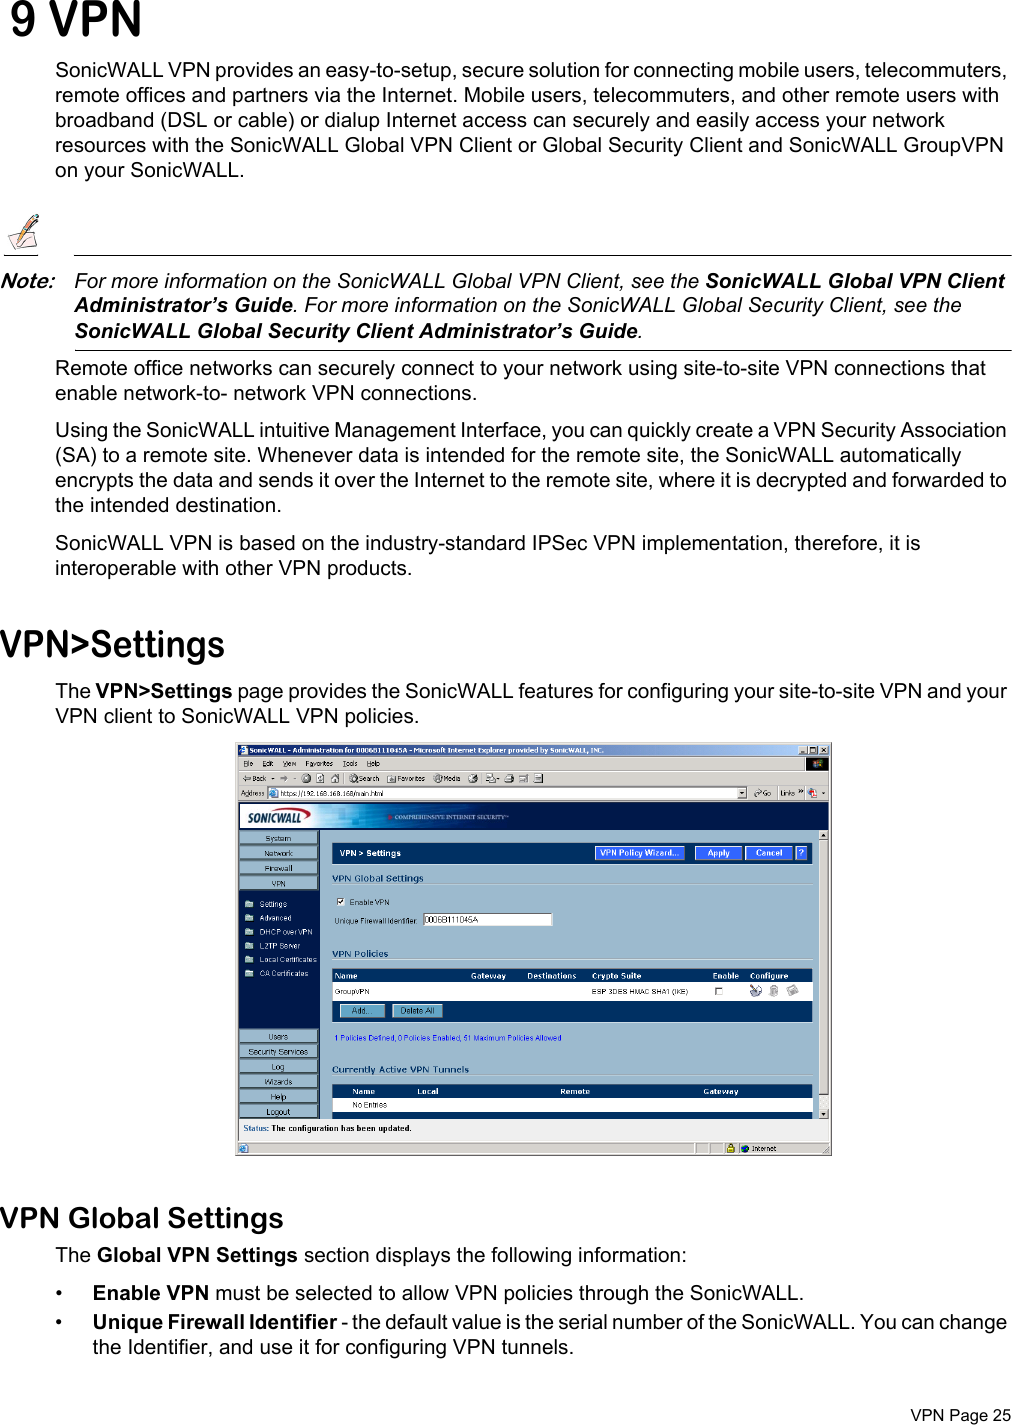  VPN Page 25 9 VPNSonicWALL VPN provides an easy-to-setup, secure solution for connecting mobile users, telecommuters, remote offices and partners via the Internet. Mobile users, telecommuters, and other remote users with broadband (DSL or cable) or dialup Internet access can securely and easily access your network resources with the SonicWALL Global VPN Client or Global Security Client and SonicWALL GroupVPN on your SonicWALL.Note:For more information on the SonicWALL Global VPN Client, see the SonicWALL Global VPN Client Administrator’s Guide. For more information on the SonicWALL Global Security Client, see the SonicWALL Global Security Client Administrator’s Guide. Remote office networks can securely connect to your network using site-to-site VPN connections that enable network-to- network VPN connections.Using the SonicWALL intuitive Management Interface, you can quickly create a VPN Security Association (SA) to a remote site. Whenever data is intended for the remote site, the SonicWALL automatically encrypts the data and sends it over the Internet to the remote site, where it is decrypted and forwarded to the intended destination.SonicWALL VPN is based on the industry-standard IPSec VPN implementation, therefore, it is interoperable with other VPN products.VPN&gt;SettingsThe VPN&gt;Settings page provides the SonicWALL features for configuring your site-to-site VPN and your VPN client to SonicWALL VPN policies. VPN Global SettingsThe Global VPN Settings section displays the following information:•Enable VPN must be selected to allow VPN policies through the SonicWALL. •Unique Firewall Identifier - the default value is the serial number of the SonicWALL. You can change the Identifier, and use it for configuring VPN tunnels.